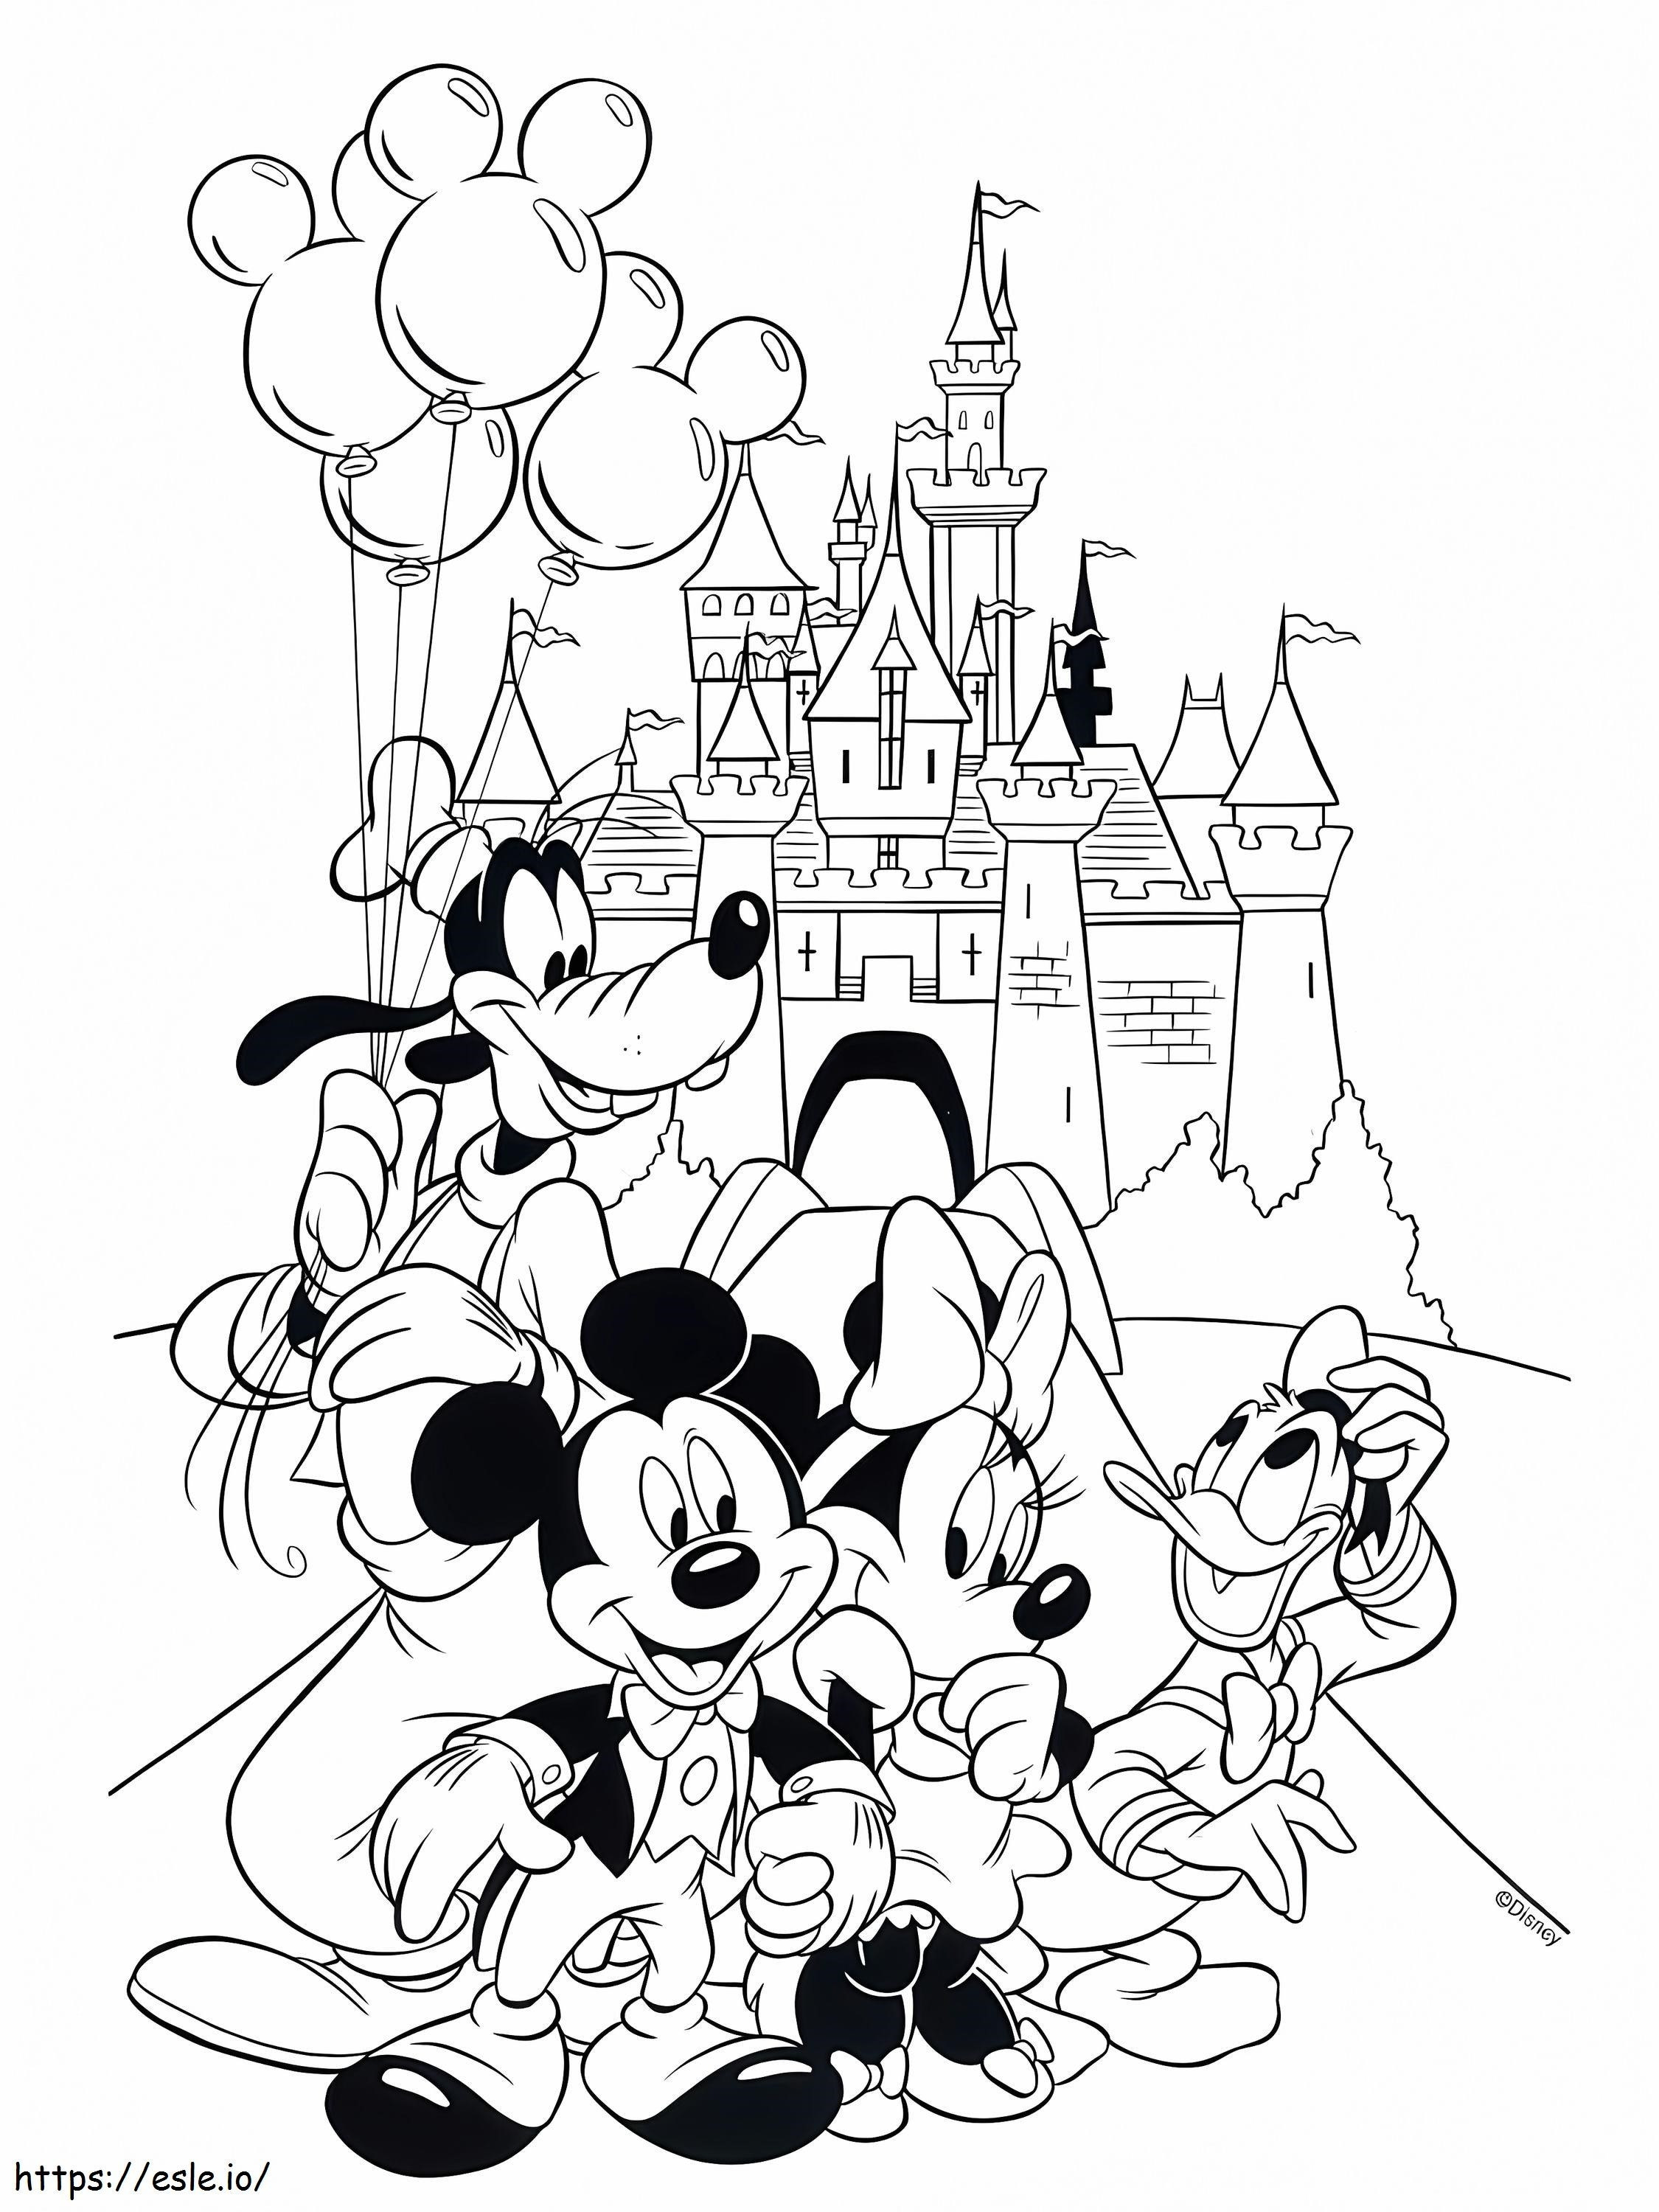 Disney Characters And Castle coloring page